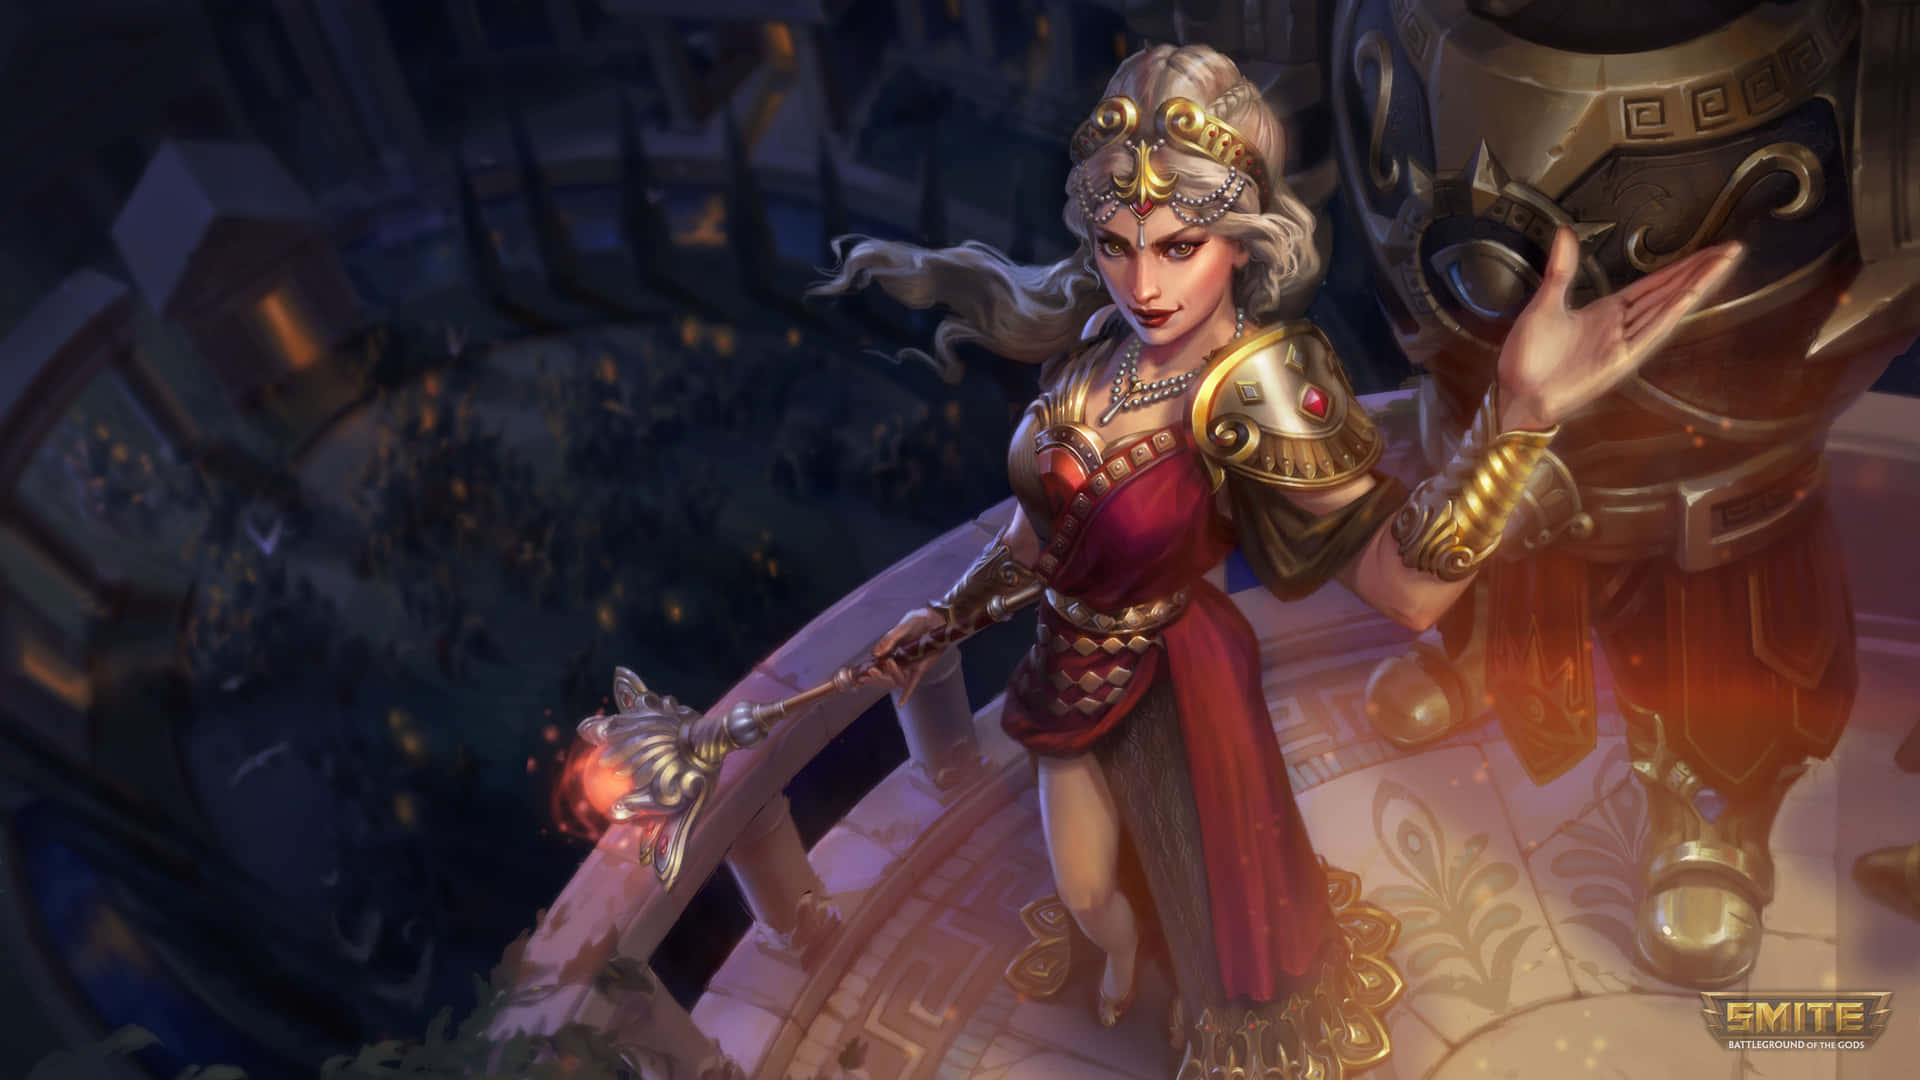 Join the gods and goddesses of Smite in an epic battle! Wallpaper